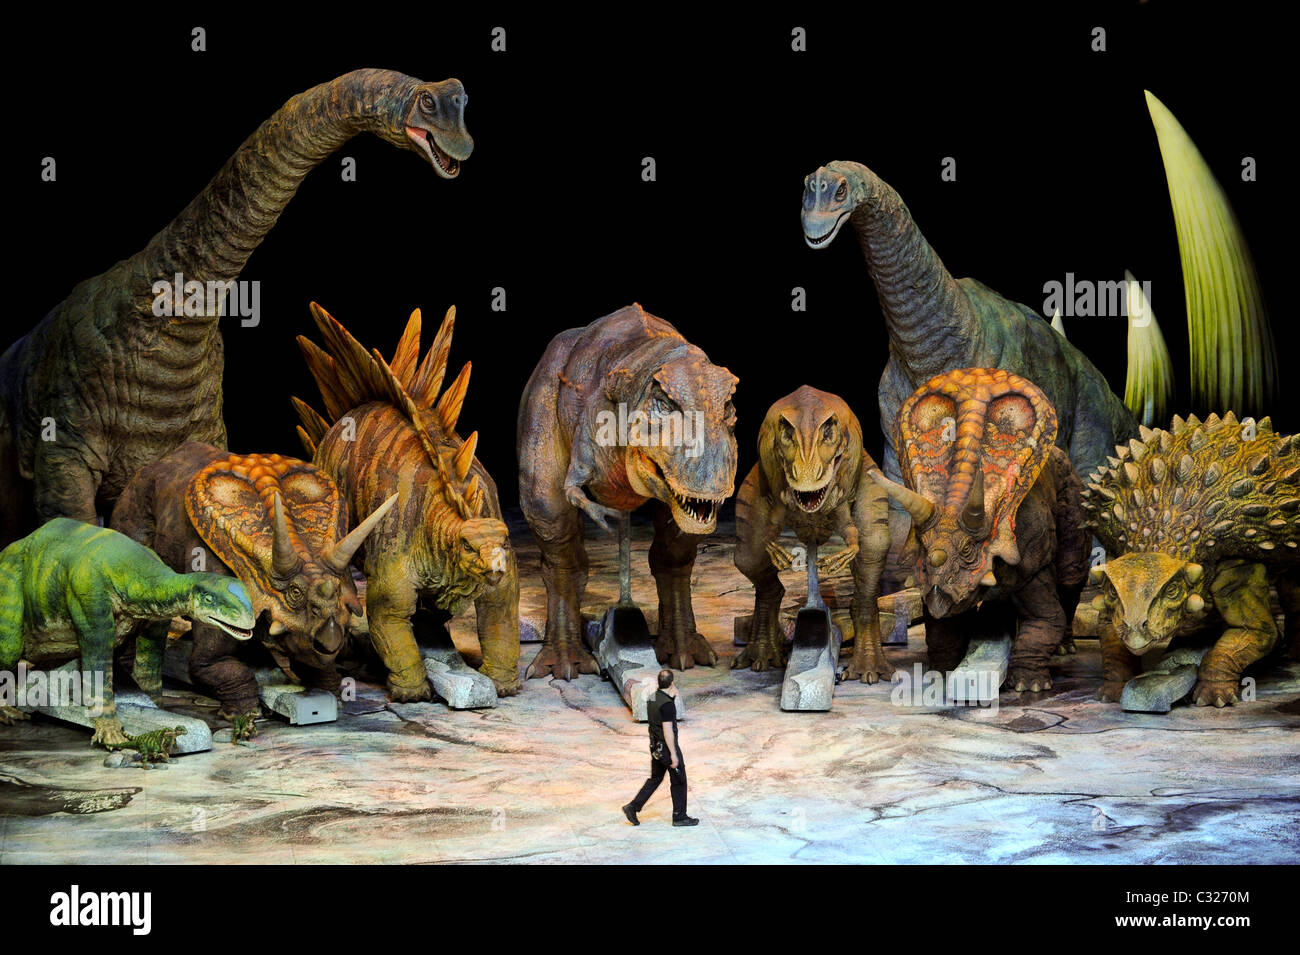 Dinosaurs High Resolution Stock Photography and Images - Alamy